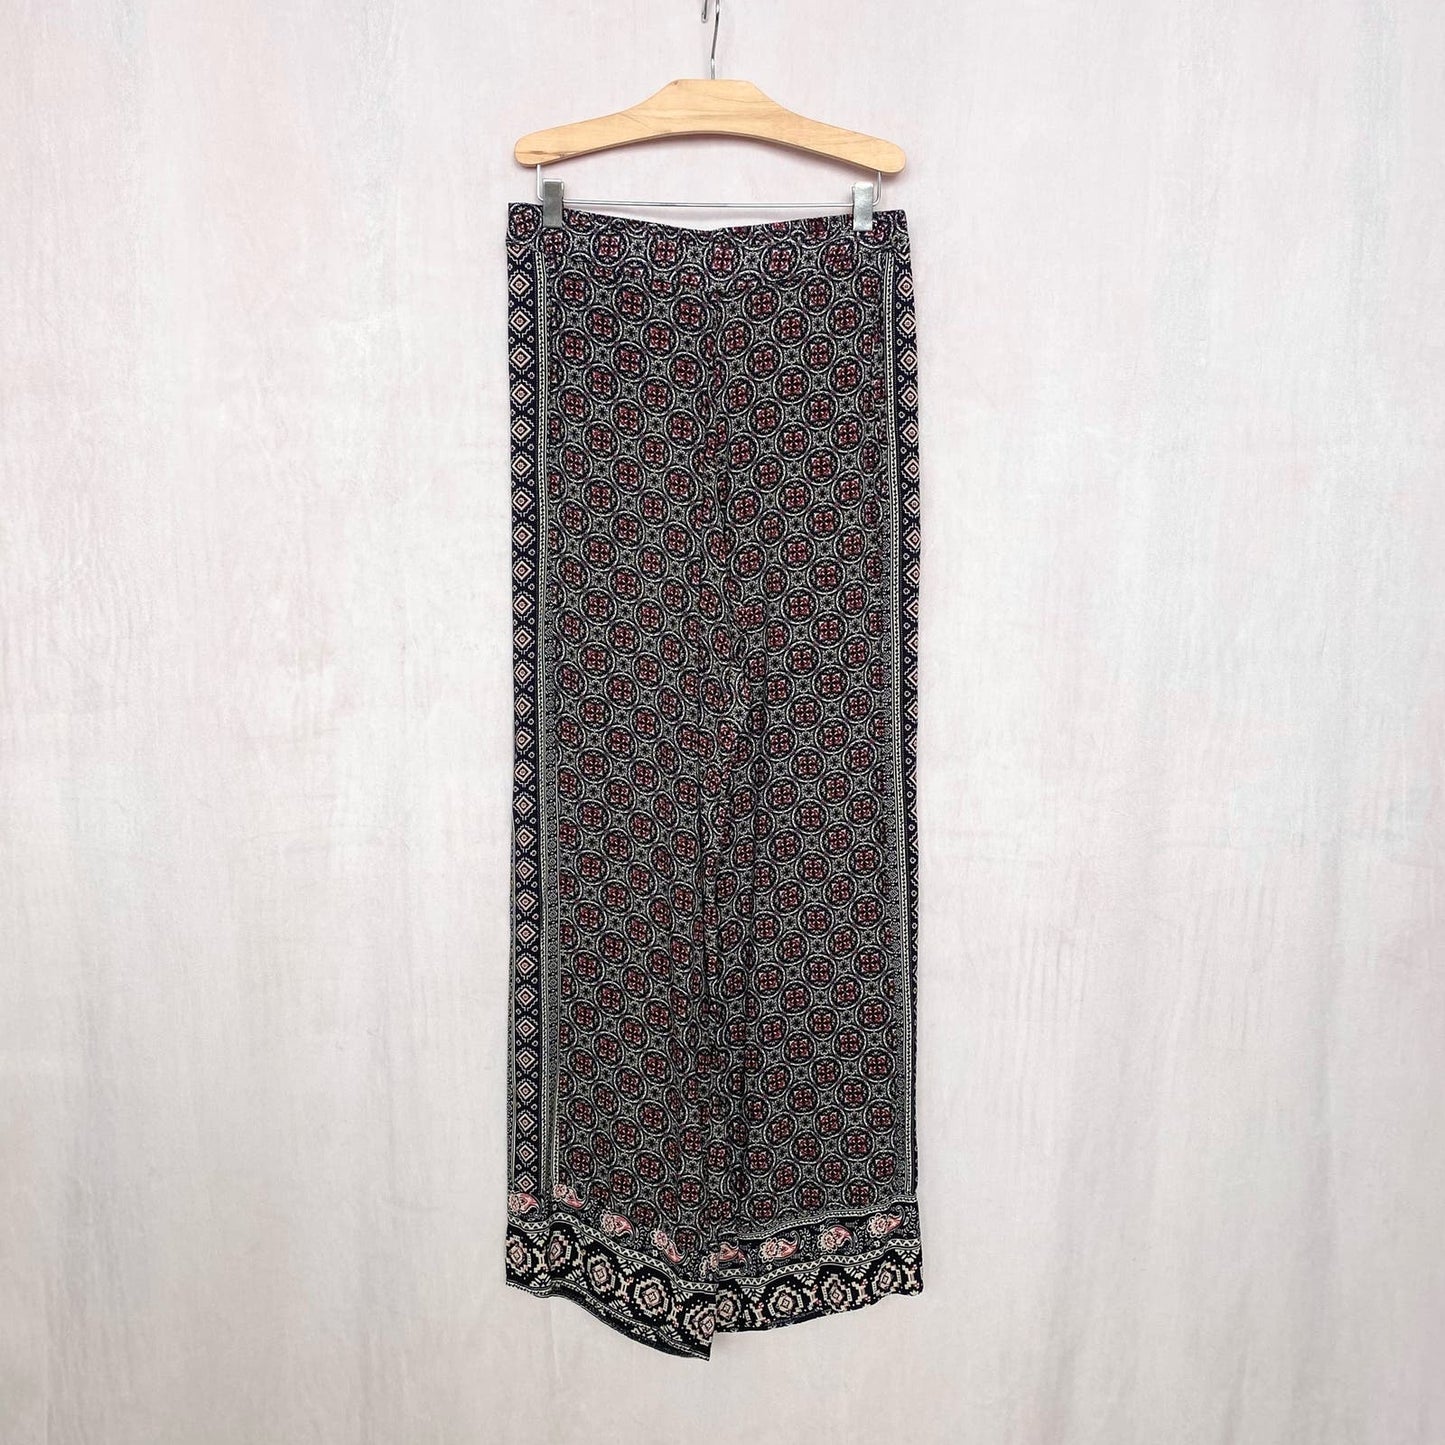 Secondhand Solitaire High Rise Boho Flowy Wide Leg Pants, Size Small